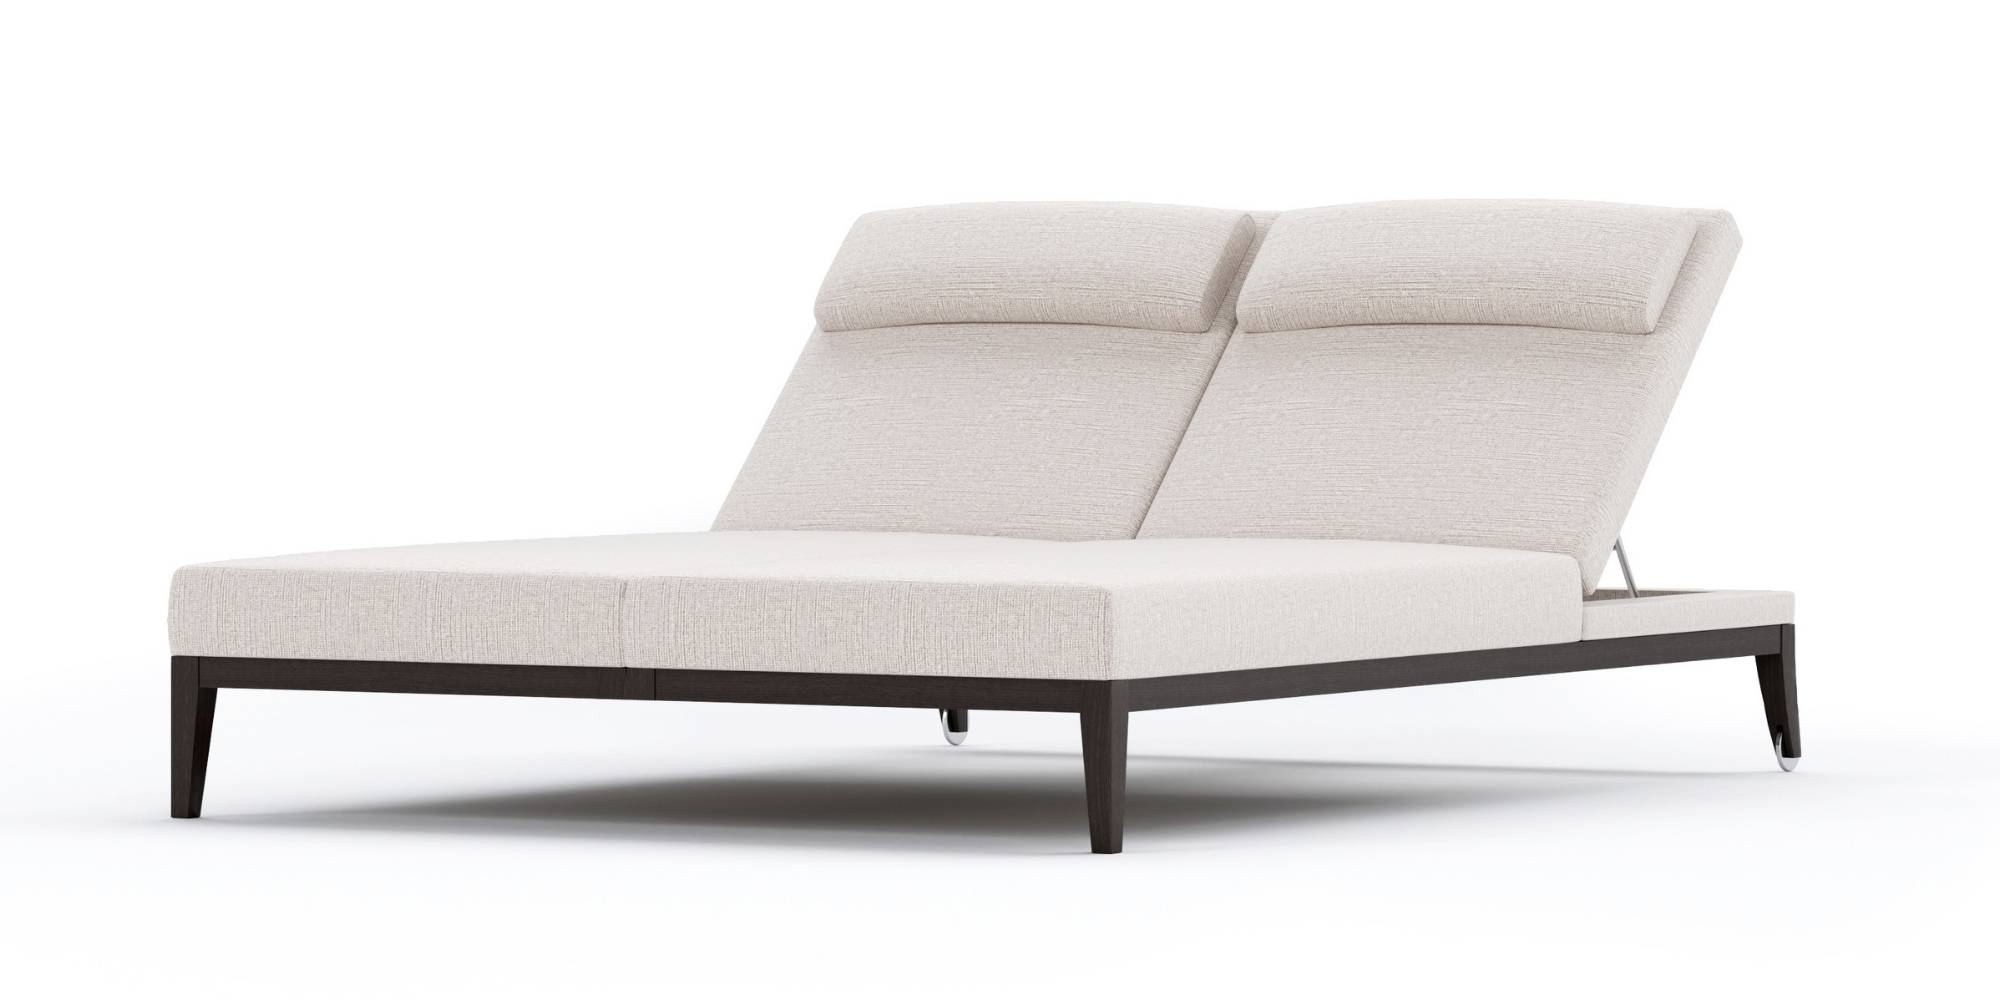 Azur Lounger in Outdoor Loungers for Azur collection